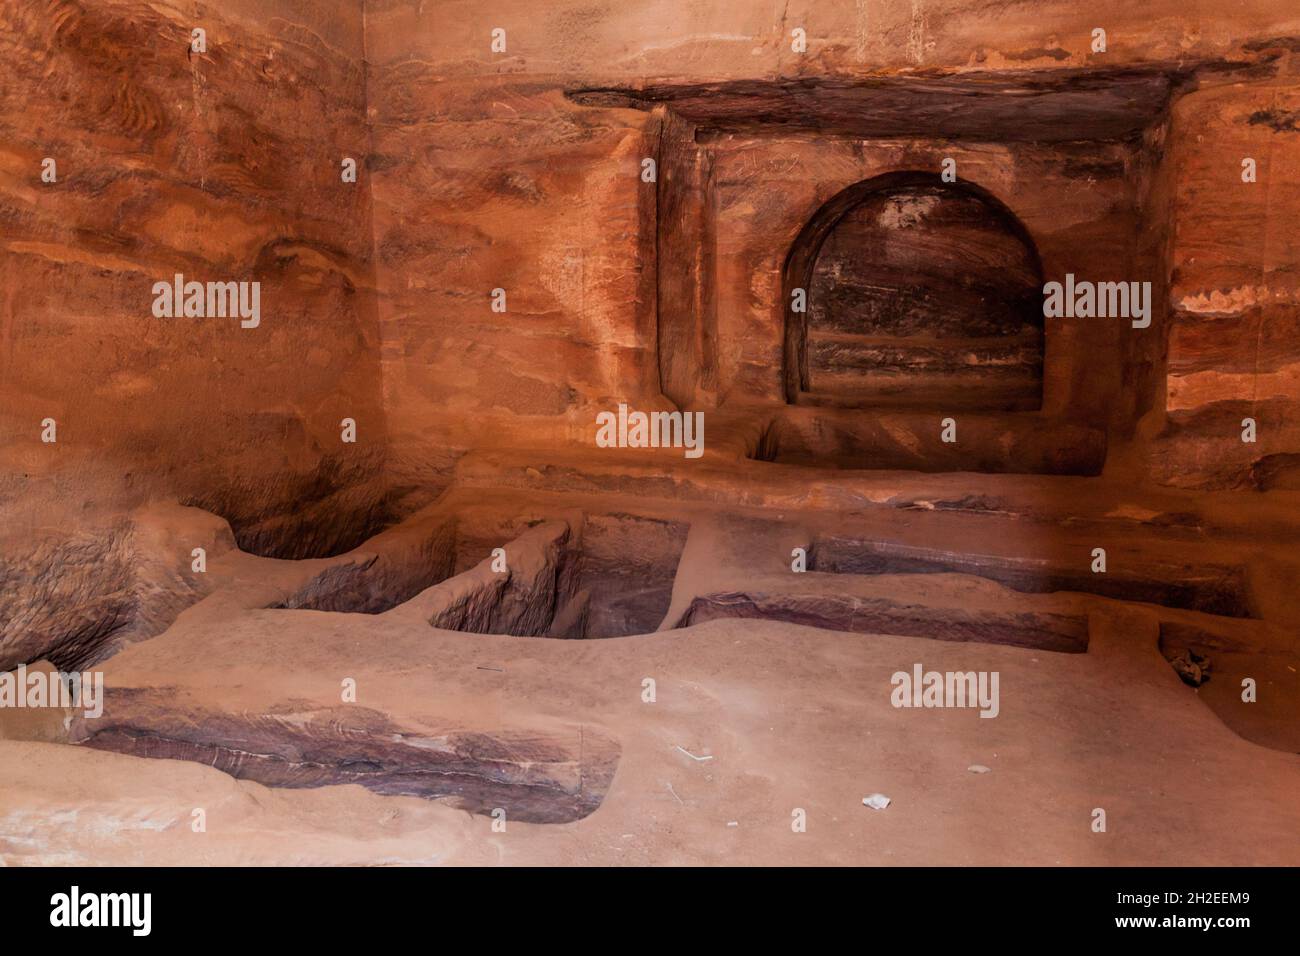 One of the tombs in the ancient city Petra, Jordan Stock Photo